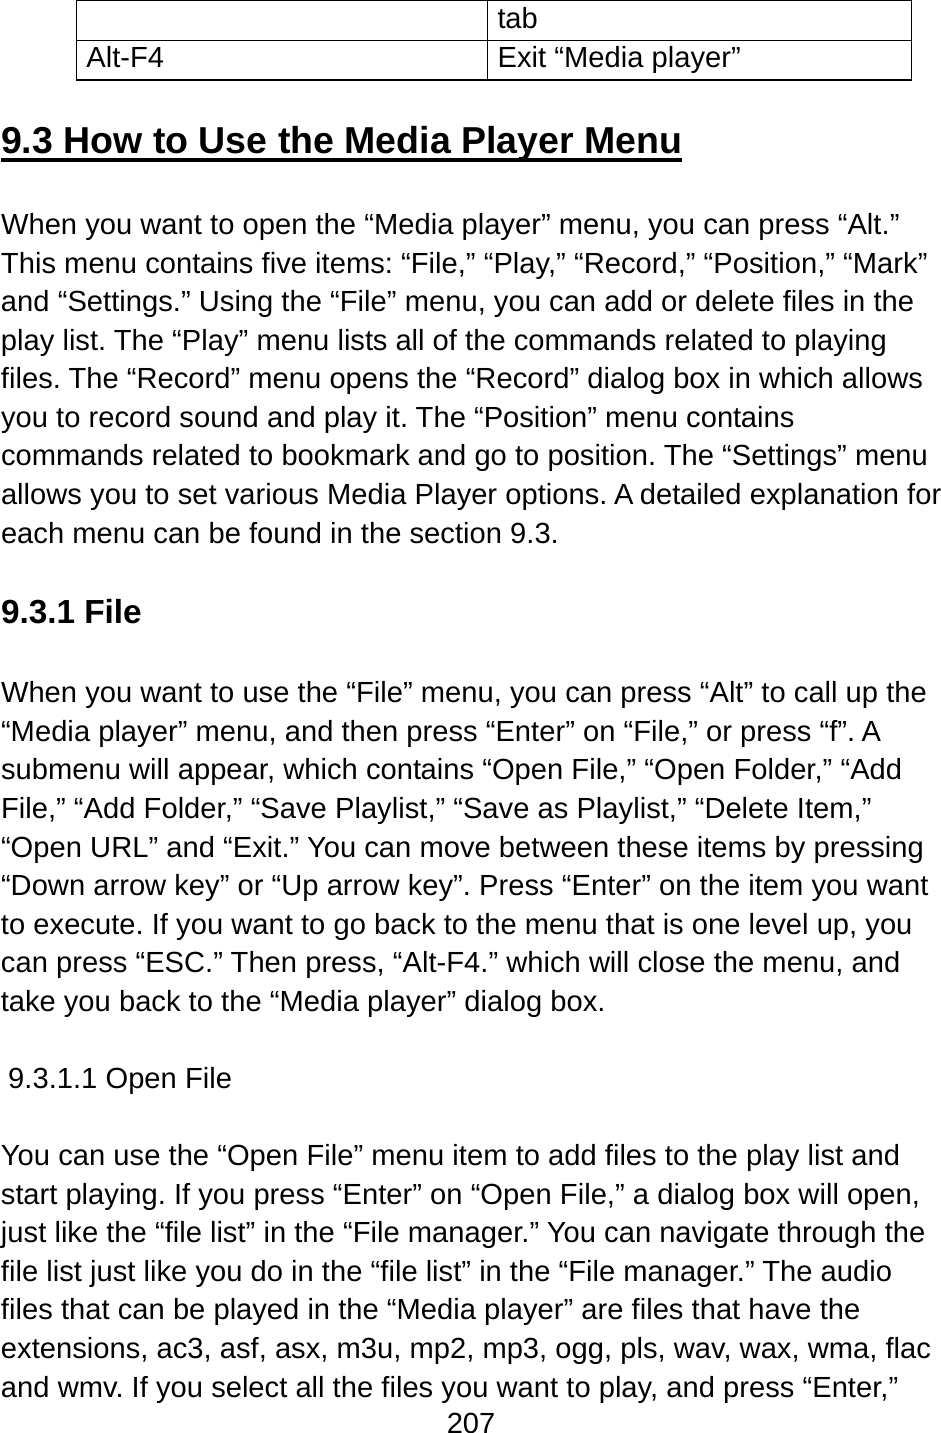 207  tab Alt-F4  Exit “Media player”  9.3 How to Use the Media Player Menu  When you want to open the “Media player” menu, you can press “Alt.” This menu contains five items: “File,” “Play,” “Record,” “Position,” “Mark” and “Settings.” Using the “File” menu, you can add or delete files in the play list. The “Play” menu lists all of the commands related to playing files. The “Record” menu opens the “Record” dialog box in which allows you to record sound and play it. The “Position” menu contains commands related to bookmark and go to position. The “Settings” menu allows you to set various Media Player options. A detailed explanation for each menu can be found in the section 9.3.  9.3.1 File  When you want to use the “File” menu, you can press “Alt” to call up the “Media player” menu, and then press “Enter” on “File,” or press “f”. A submenu will appear, which contains “Open File,” “Open Folder,” “Add File,” “Add Folder,” “Save Playlist,” “Save as Playlist,” “Delete Item,” “Open URL” and “Exit.” You can move between these items by pressing “Down arrow key” or “Up arrow key”. Press “Enter” on the item you want to execute. If you want to go back to the menu that is one level up, you can press “ESC.” Then press, “Alt-F4.” which will close the menu, and take you back to the “Media player” dialog box.  9.3.1.1 Open File  You can use the “Open File” menu item to add files to the play list and start playing. If you press “Enter” on “Open File,” a dialog box will open, just like the “file list” in the “File manager.” You can navigate through the file list just like you do in the “file list” in the “File manager.” The audio files that can be played in the “Media player” are files that have the extensions, ac3, asf, asx, m3u, mp2, mp3, ogg, pls, wav, wax, wma, flac and wmv. If you select all the files you want to play, and press “Enter,” 